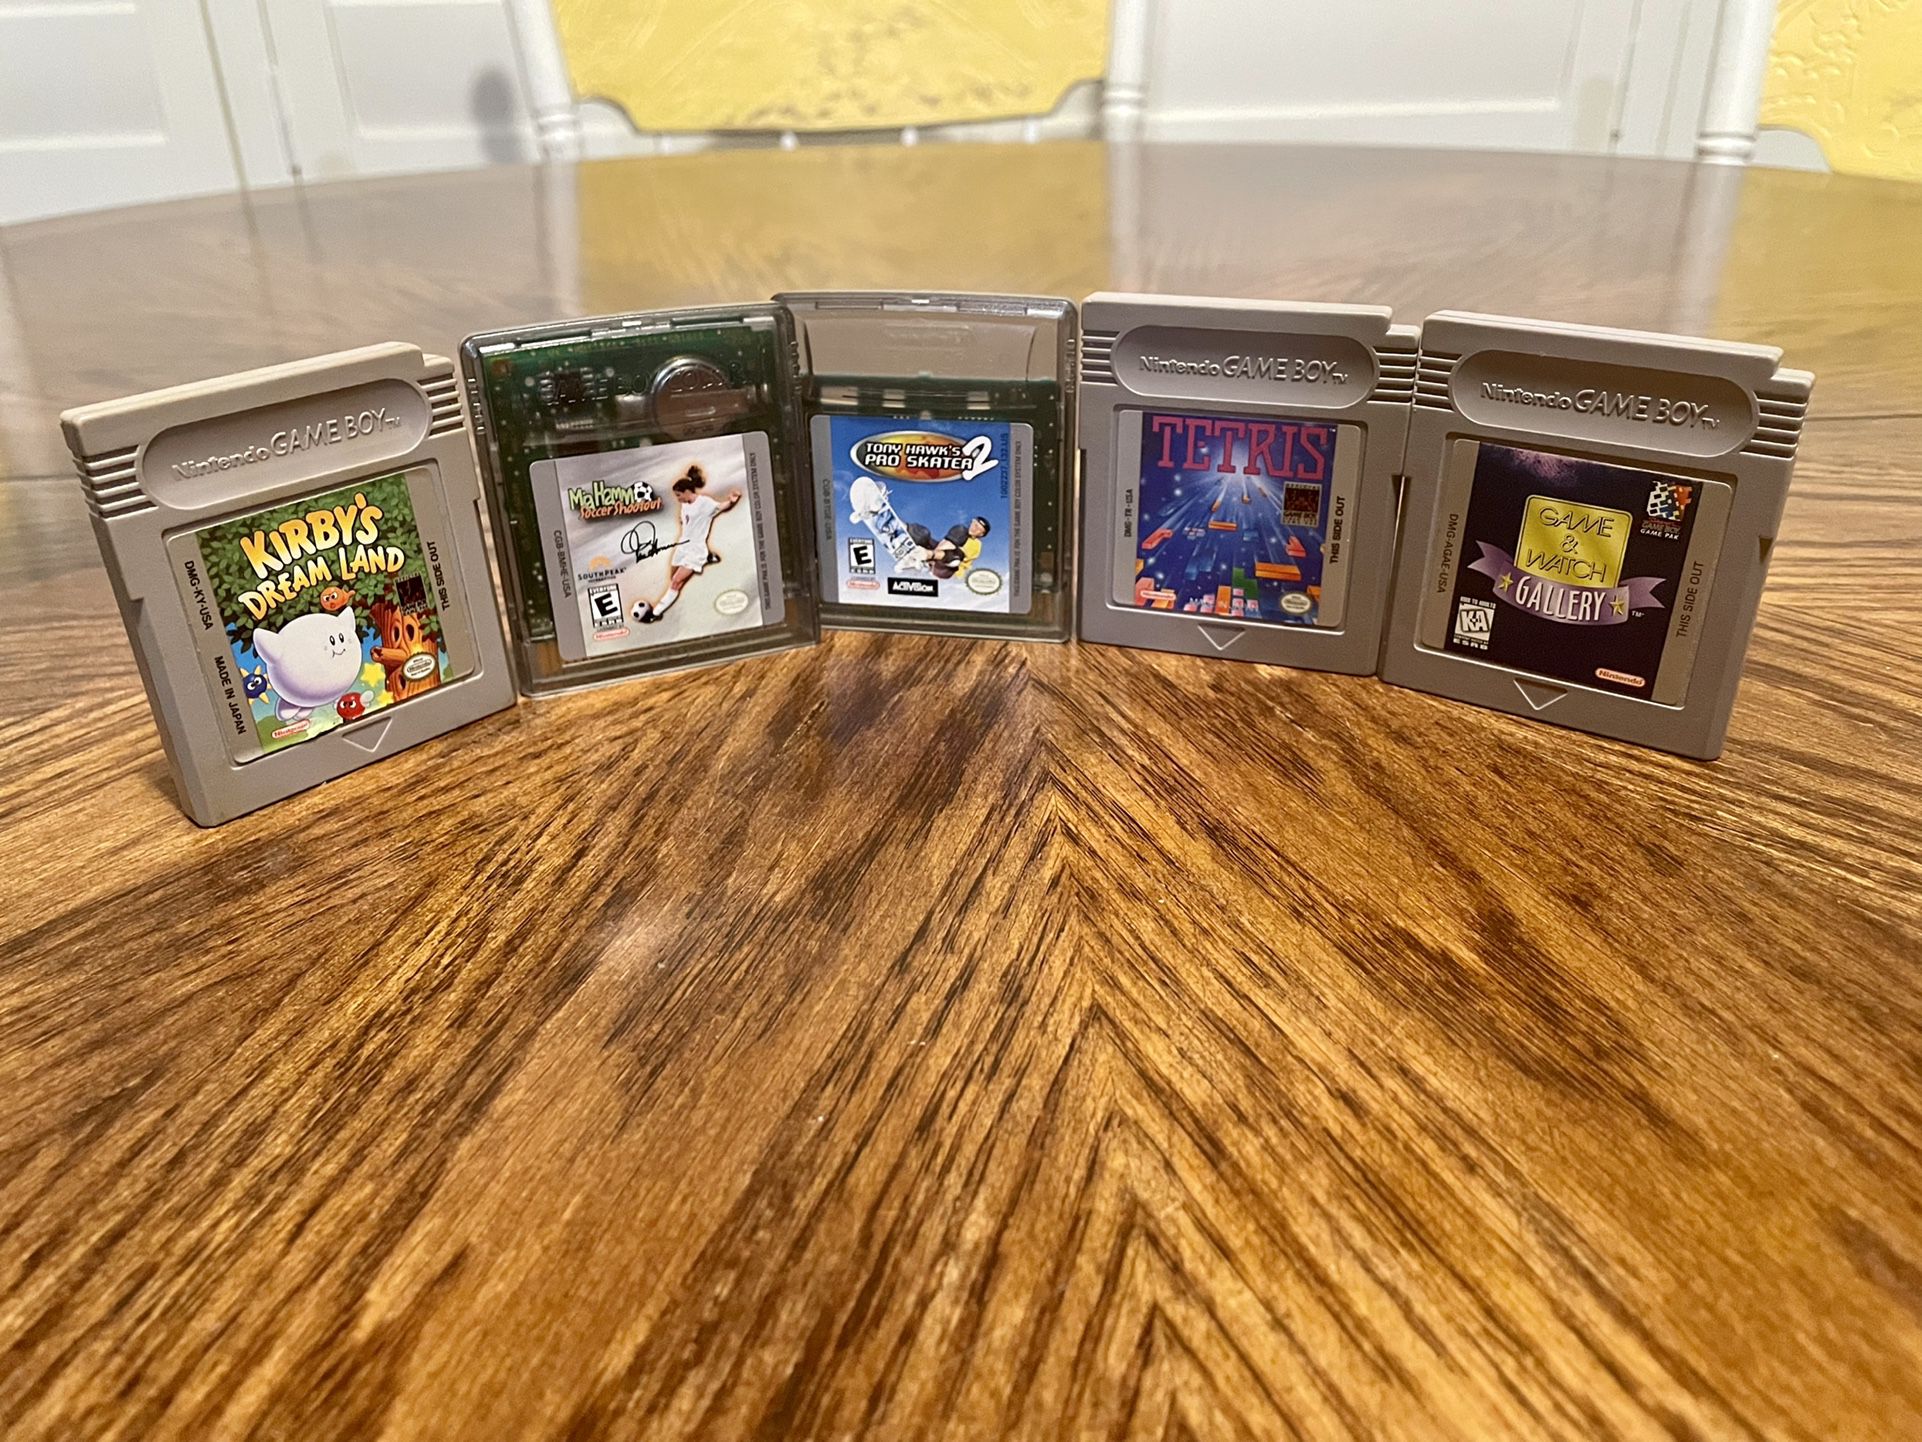 *GAMEBOY*  Various Authentic Nintendo GameBoy Games -USED